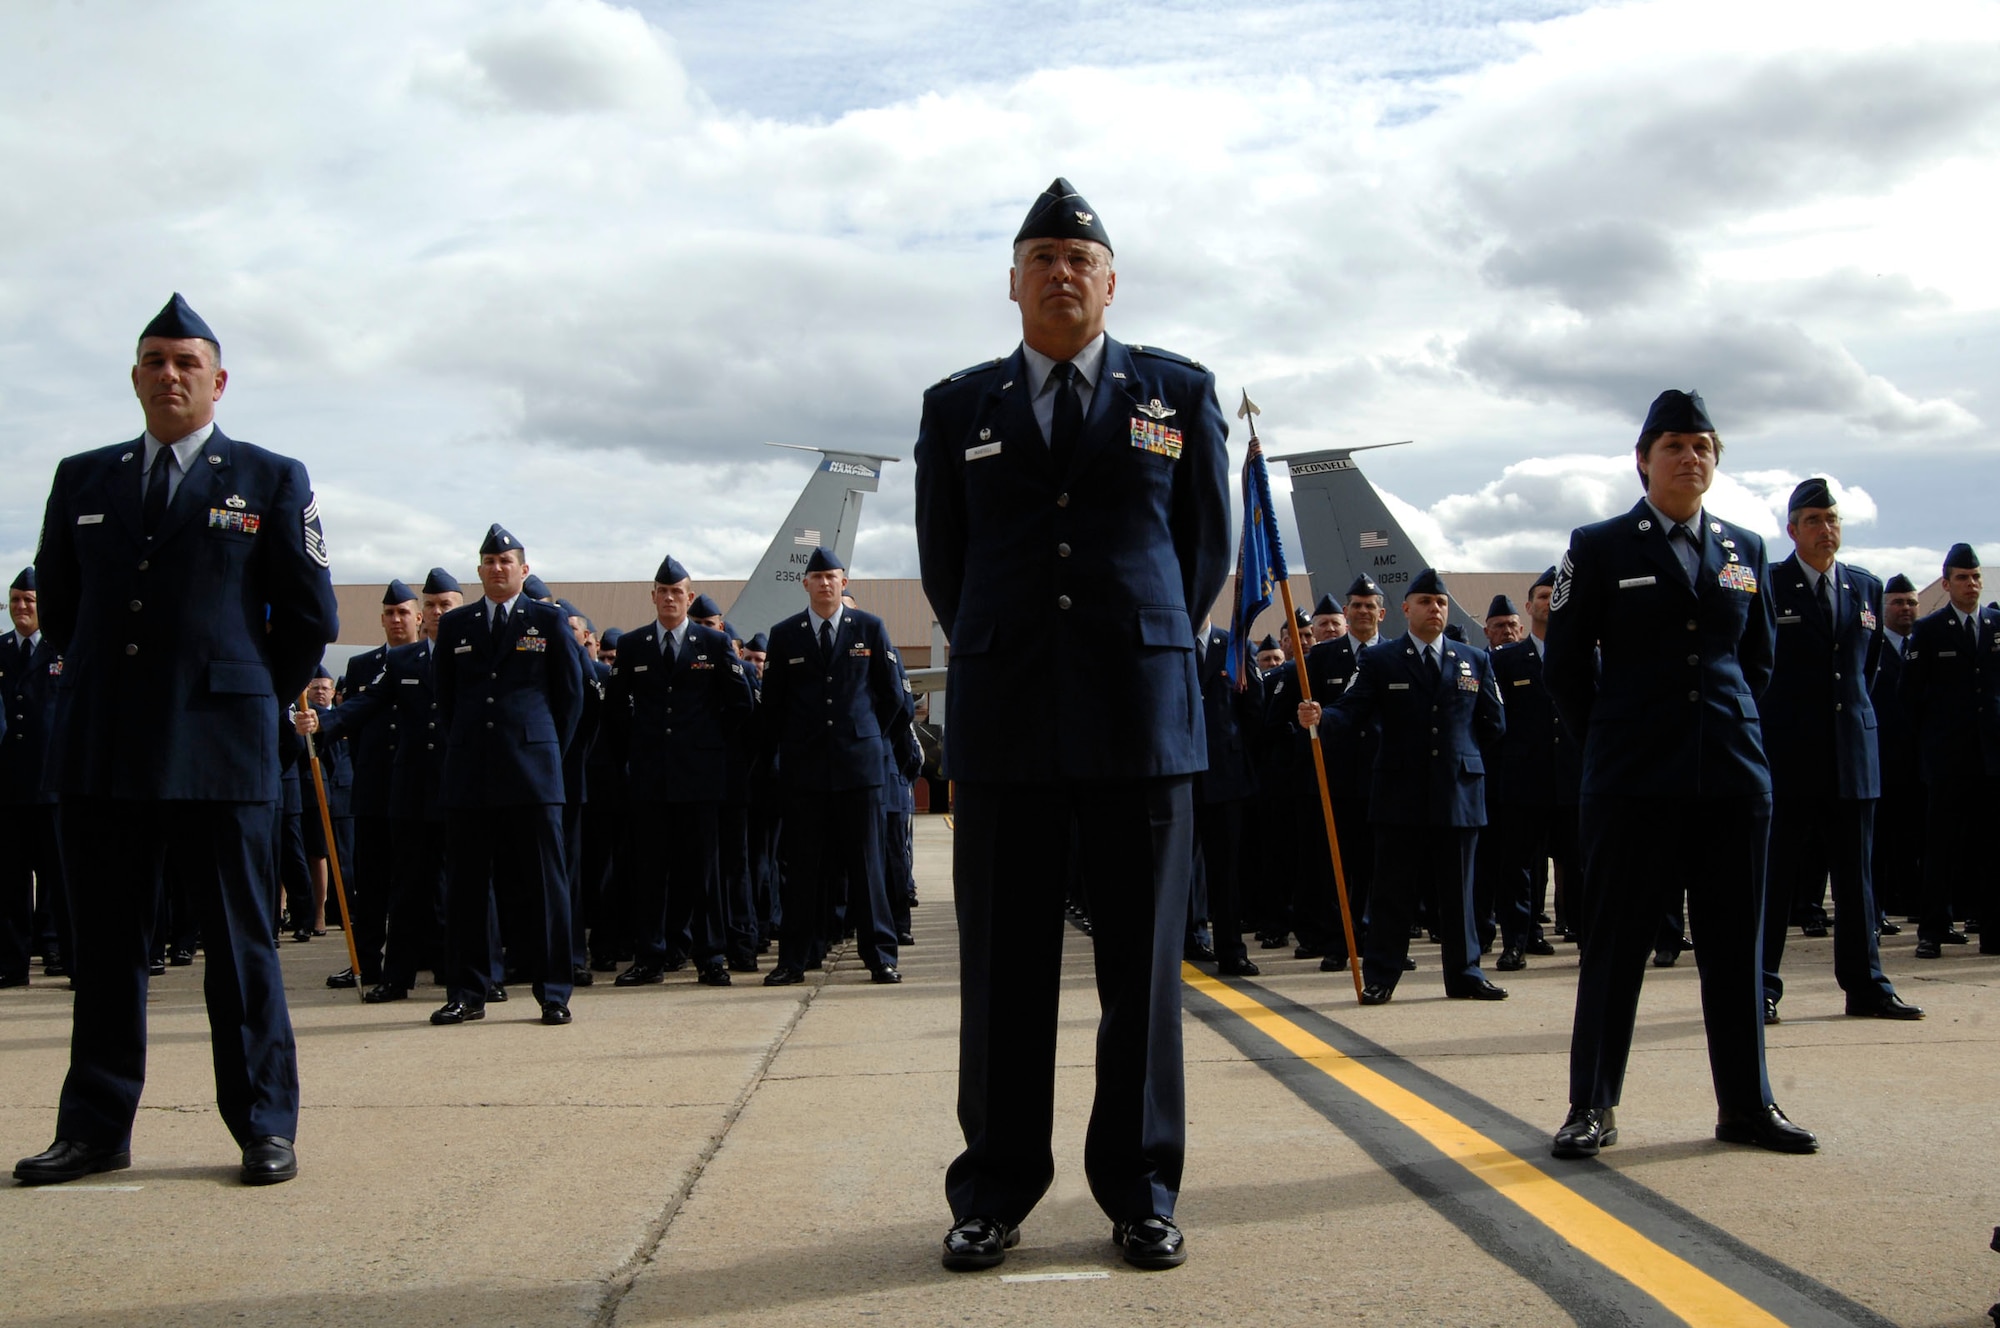 Members of the 157th Air Refueling Wing, Pease Air National Guard Base, N. H., stand at parade rest, Oct. 2, 2009, during a ceremony activating the 64th Air Refueling Squadron at Pease. Airmen from Air Mobility Command bases around the globe, including McConnell, recently moved to Pease to form the 64th ARS, the first active-duty unit to return to Pease since 1991. Once the squadron is at full strength, it will have between 120 and 130 members. (U.S. Air Force photo by Staff Sgt. Amanda Currier)